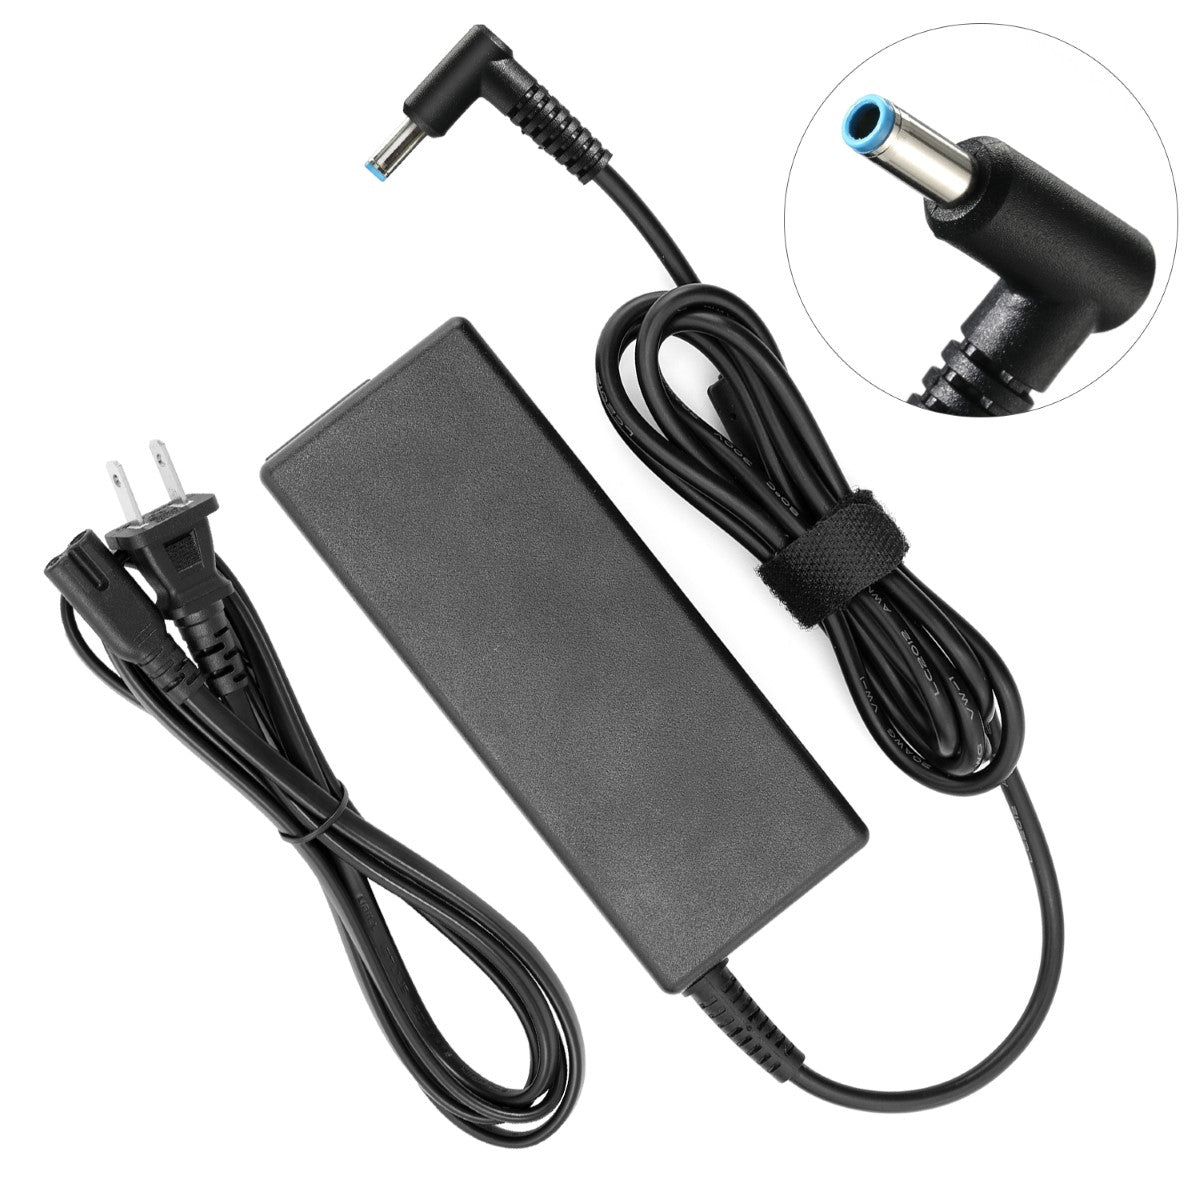 AC Adapter Charger for hp Envy Touchsmart 15-k192nr Notebook.